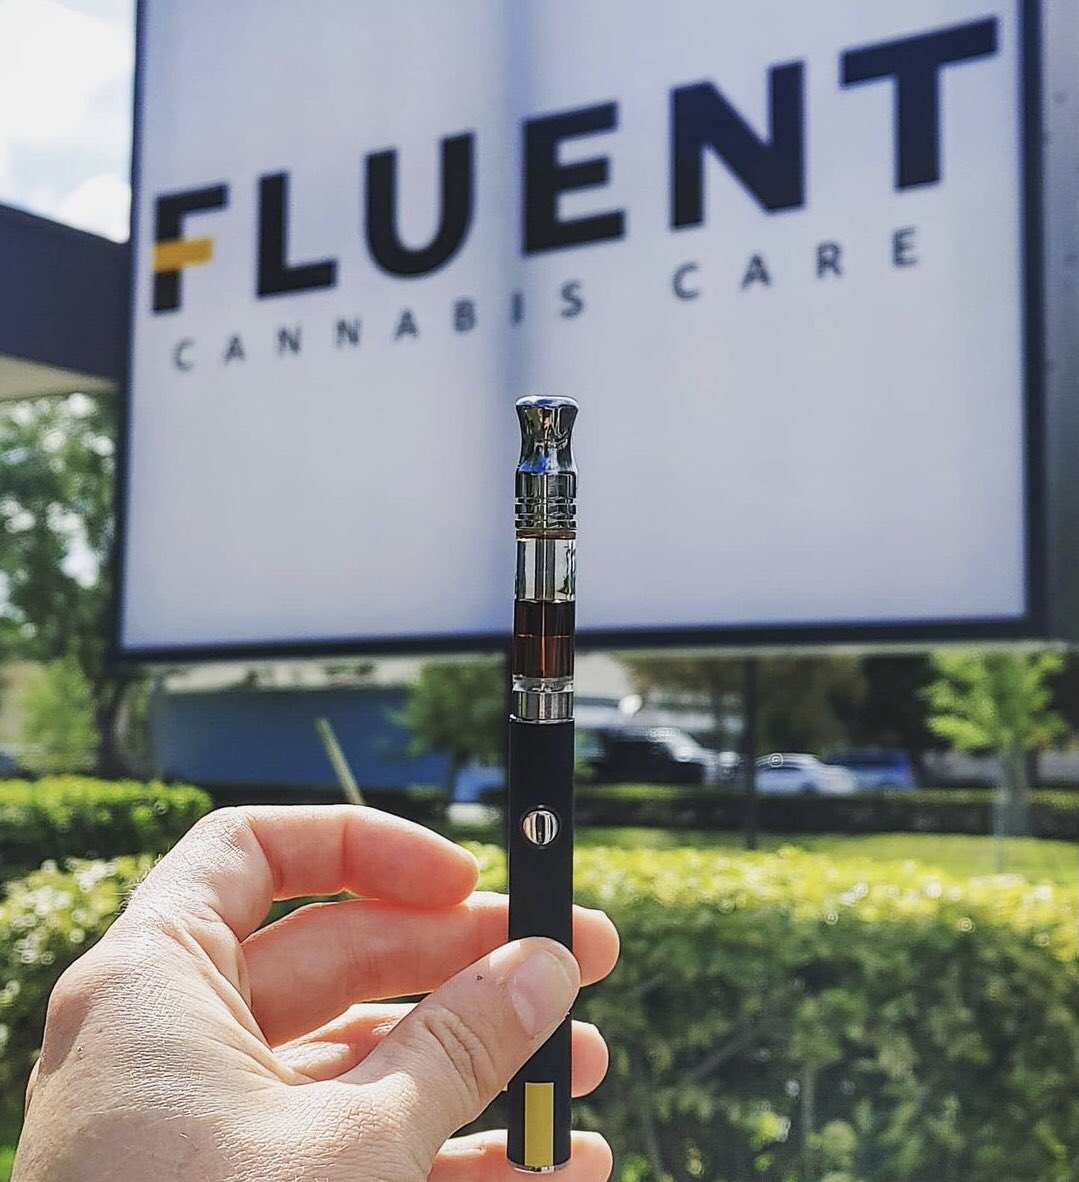 Cart half empty? 😣 Swing on by and get a refill! ❤  Every purchase earns you points to use at a future date! 🙌

#fluentcannabiscare #getfluent #fortpiercefl #carts #cannabiscommunity #cannabisforhealth #medicalcannabis #fluentfortpierce #FalloutOnPrime #vapes #vapecarts #allen